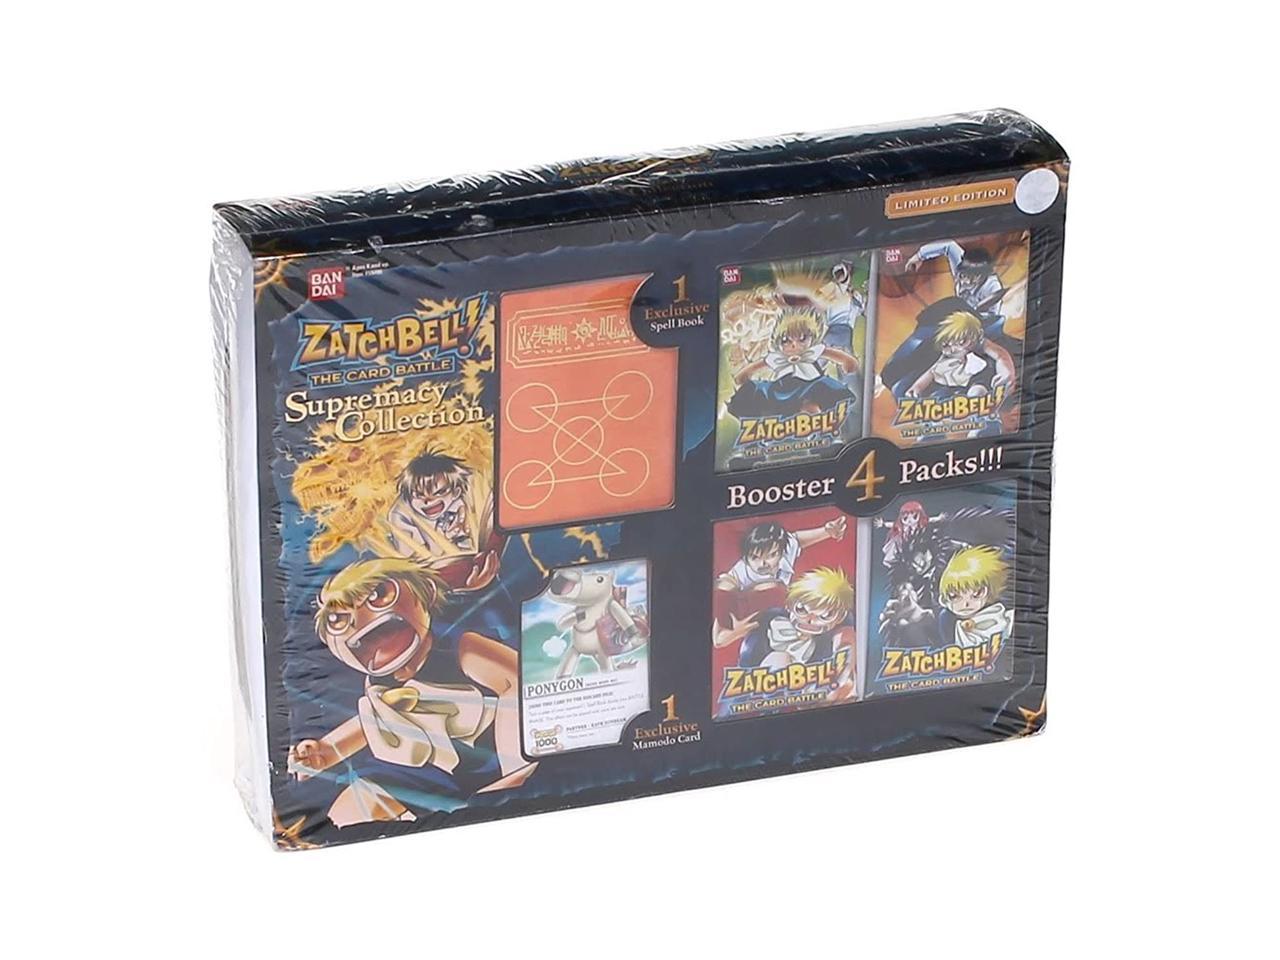 Zatchbell CCG Supremacy Collection Box by Bandai